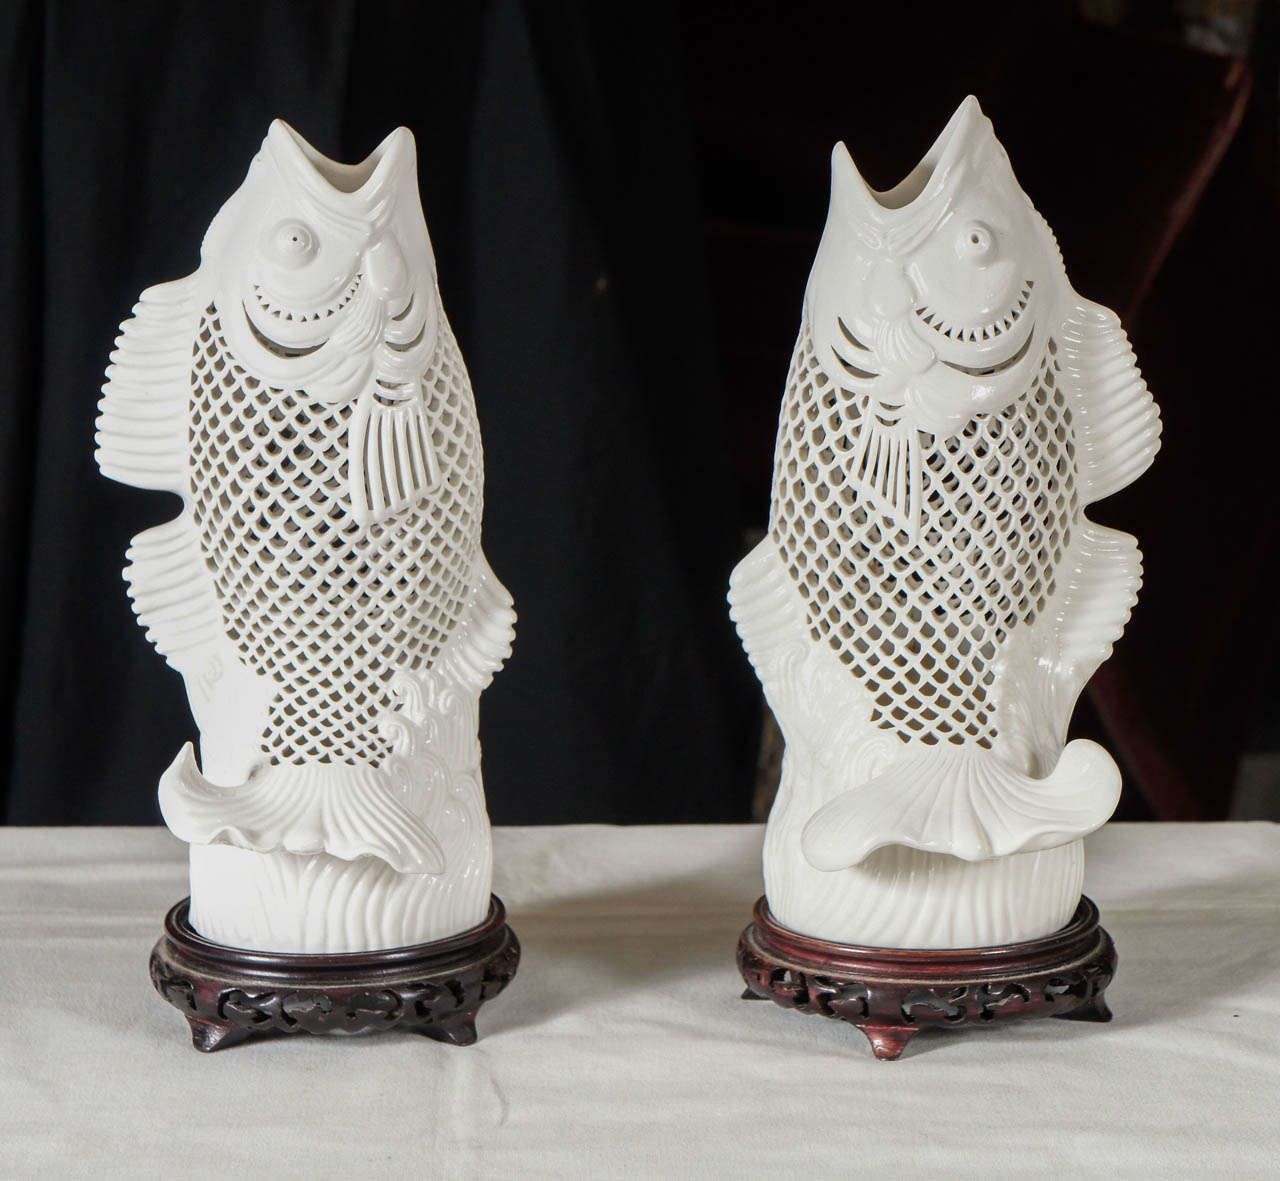 This lovely pair of Blanc De Chine fish formed of porcelain that has been carved and pierced to allow light and creating the fish scale pattern. Made in a left and a right  manor creating a  mirrored pair. The modeling is lively and the carp in fact